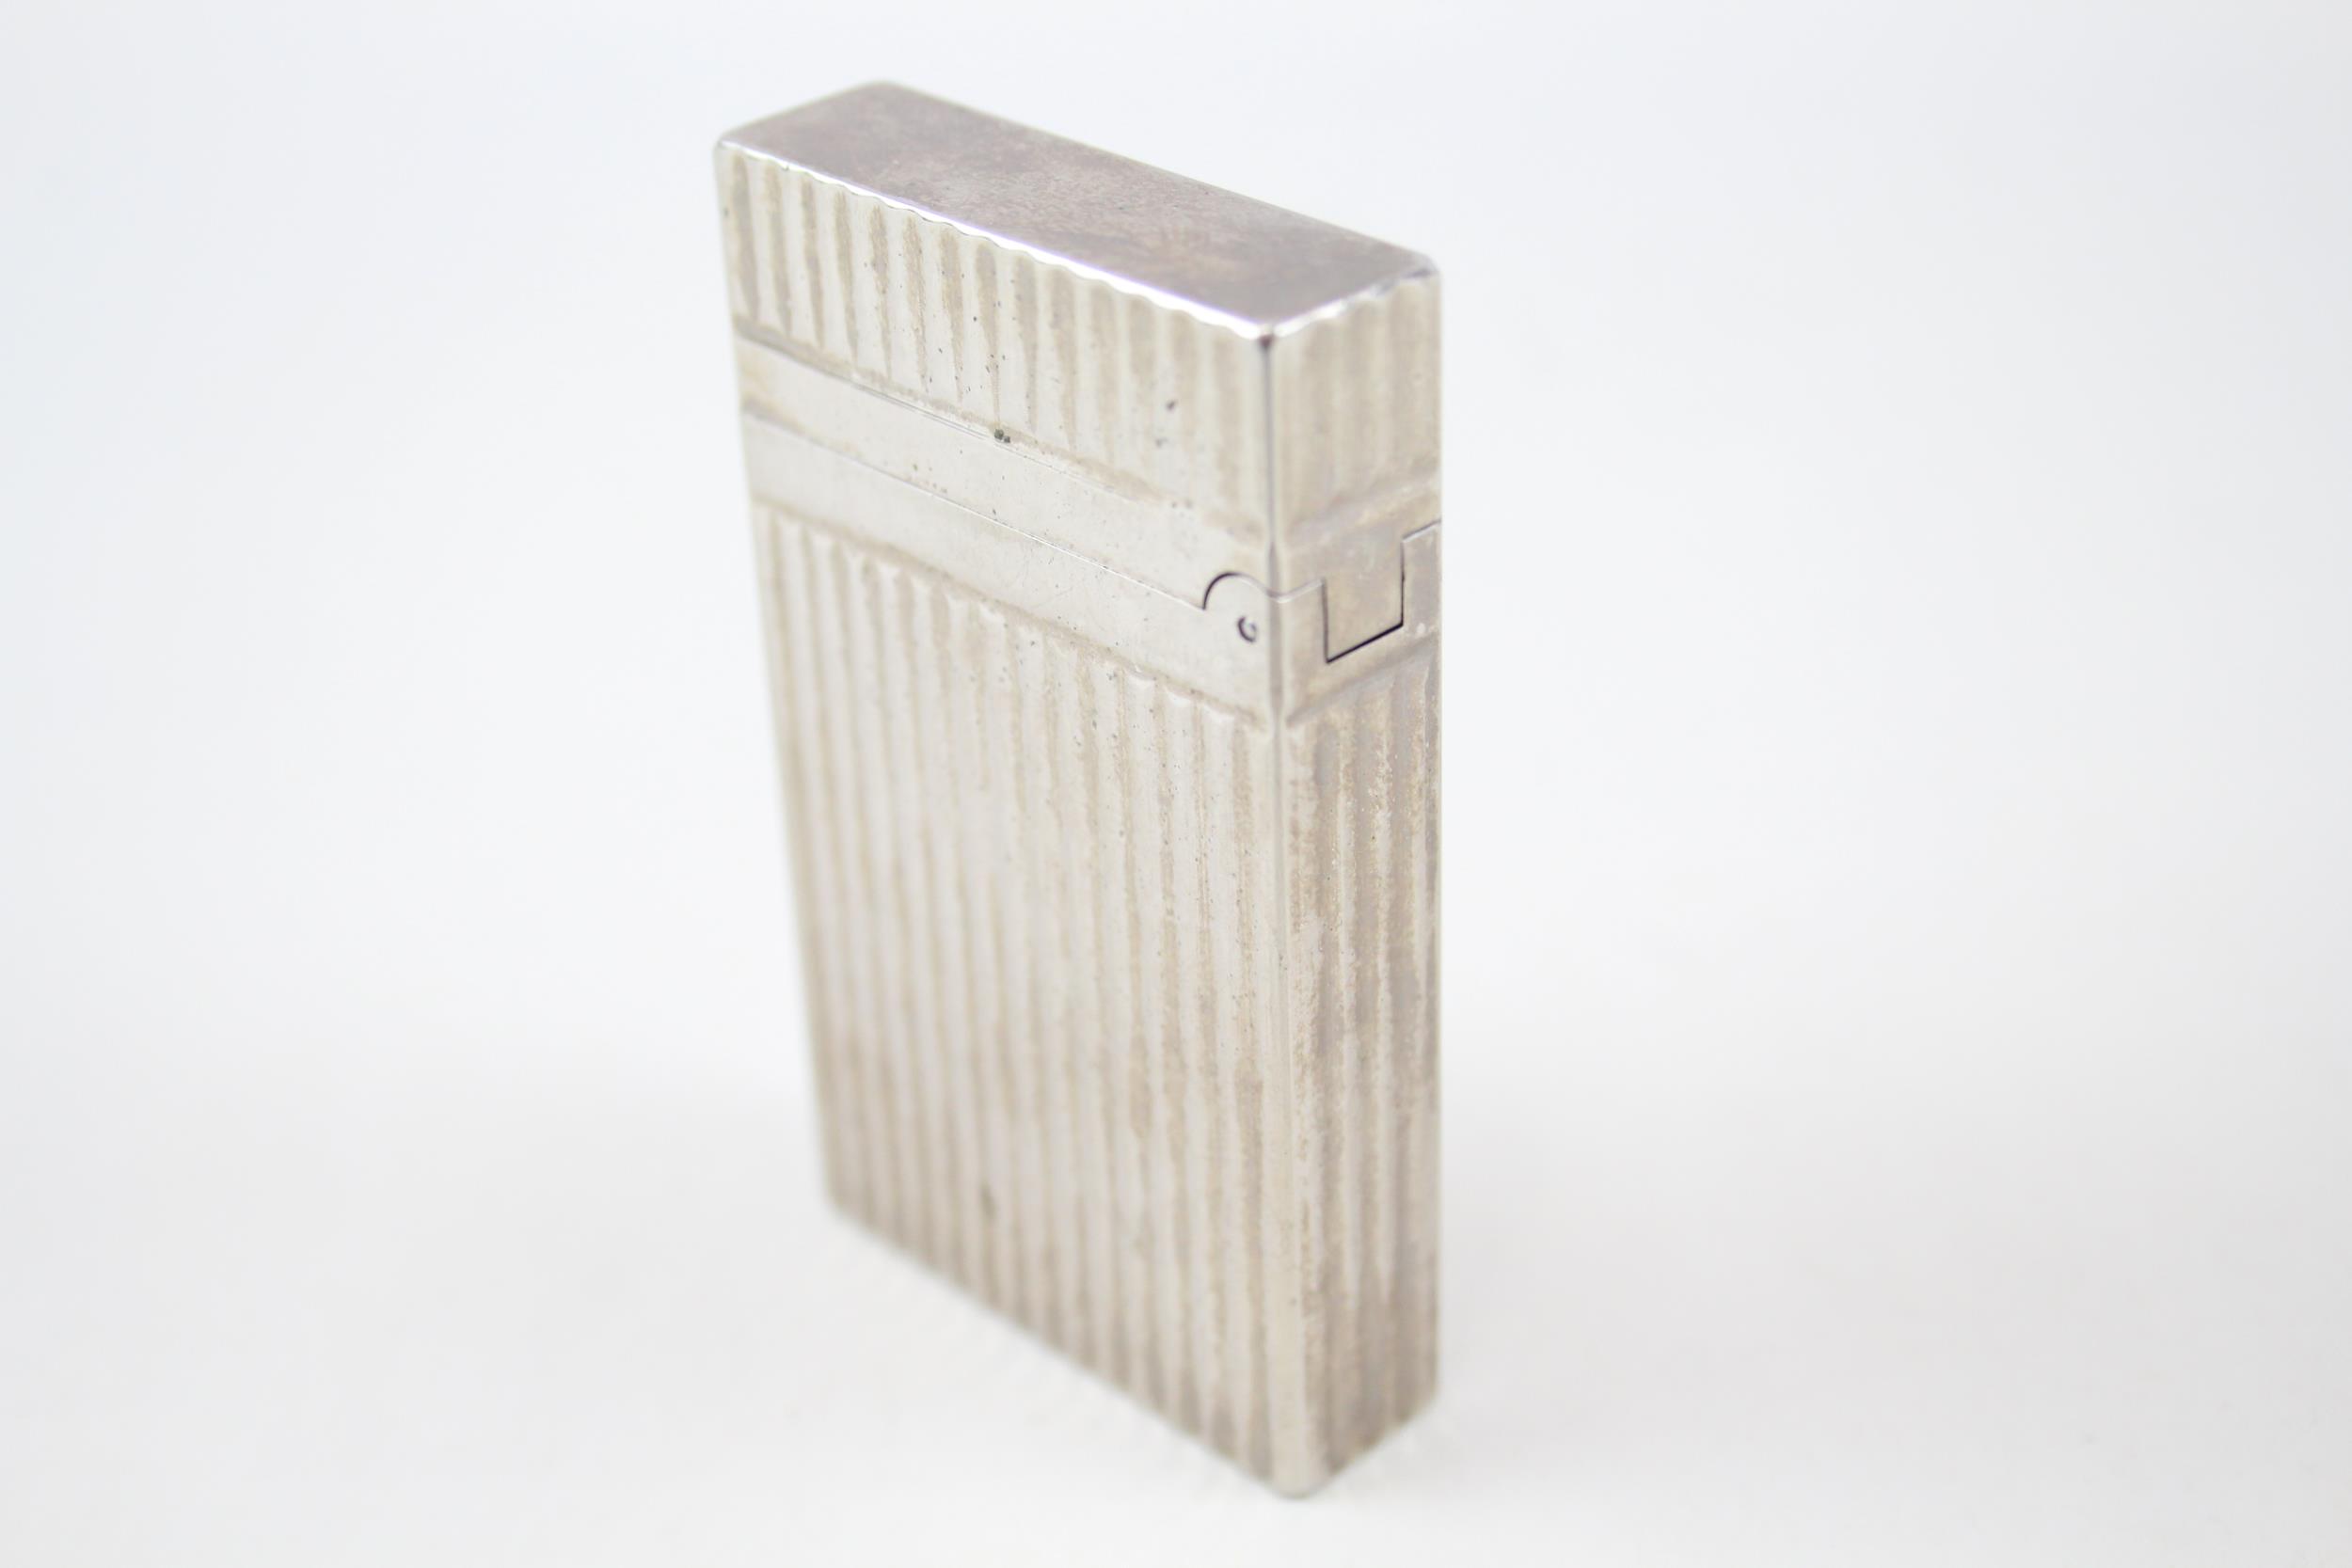 S.T DUPONT Paris Silver Plated Cigarette Lighter - 4FKI2JB (136g) - UNTESTED In previously owned - Image 4 of 5